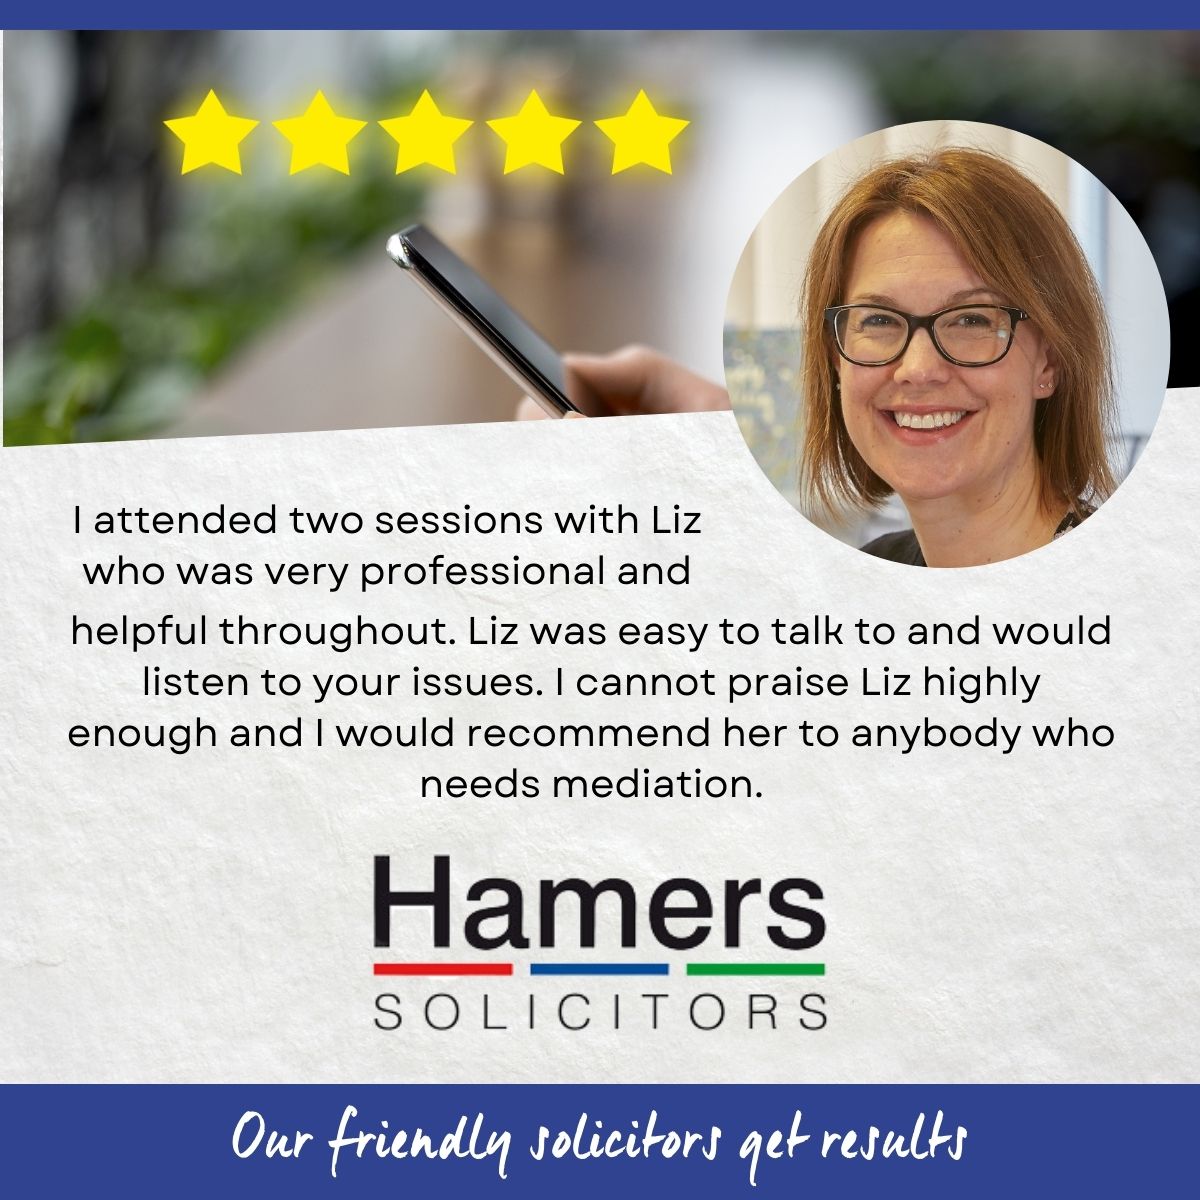 Five-star review!

'Liz was easy to talk to and would listen to your issues. I cannot praise Liz highly enough and would recommend her to anybody who needs mediation.'

Need expert family law advice? Our professional family law solicitors can help, get in touch.

#FamilyMediation